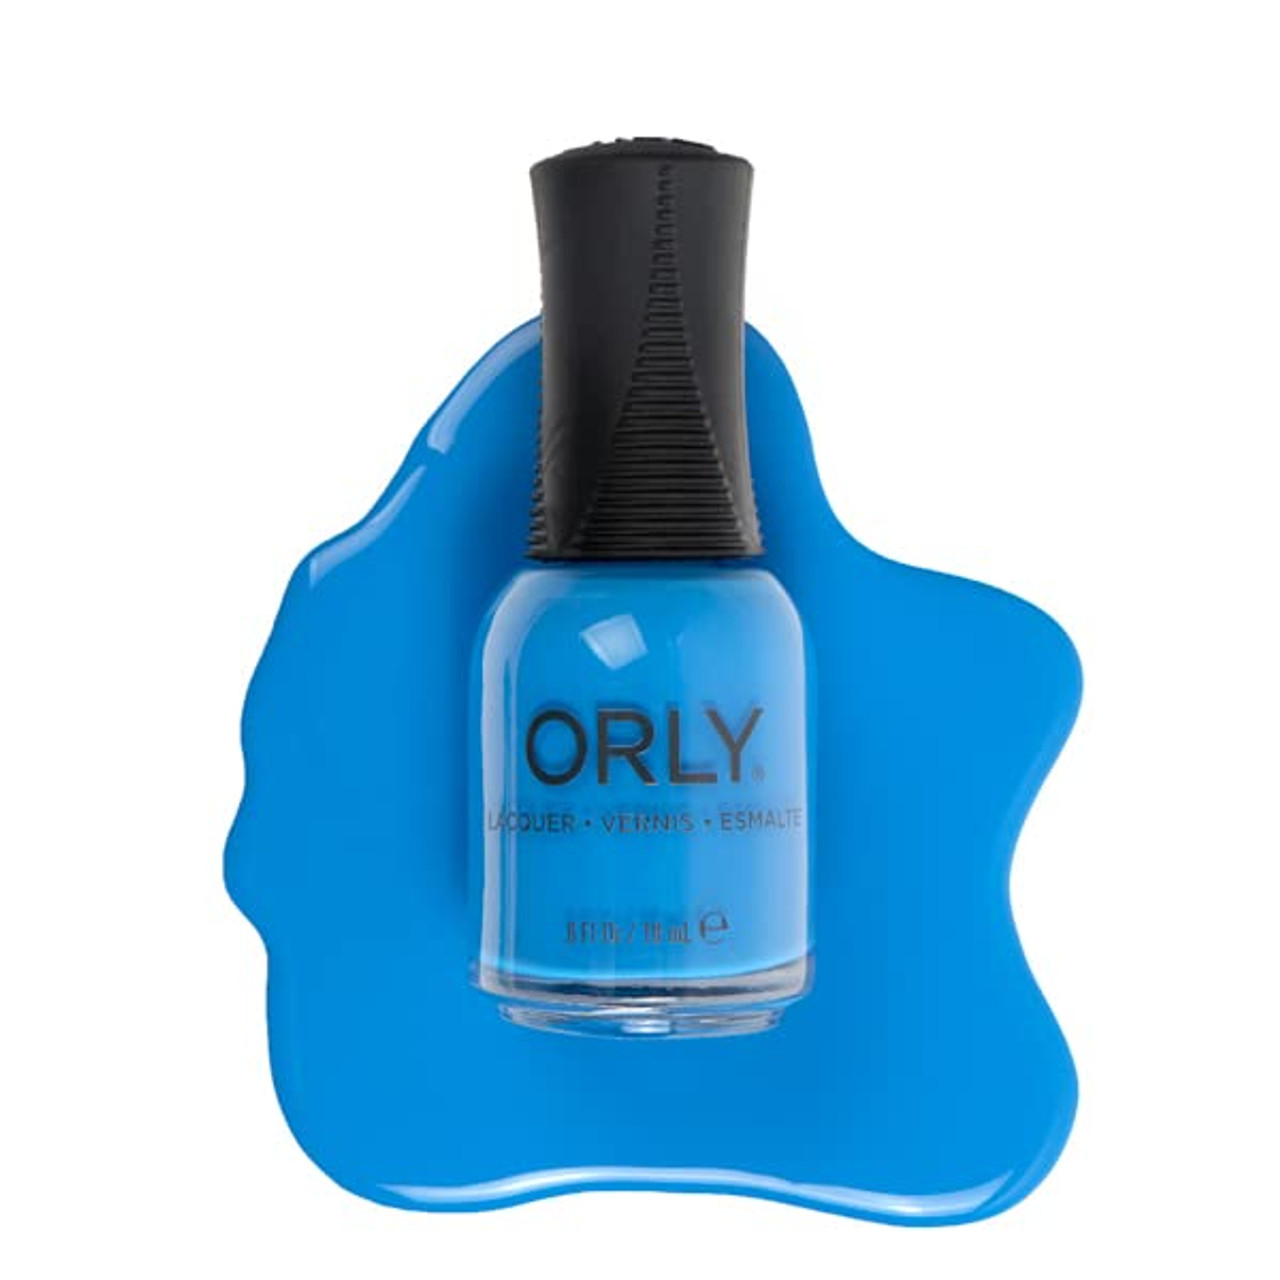 ORLY Nail Lacquer Off the Grid - .6 fl oz / 18 mL